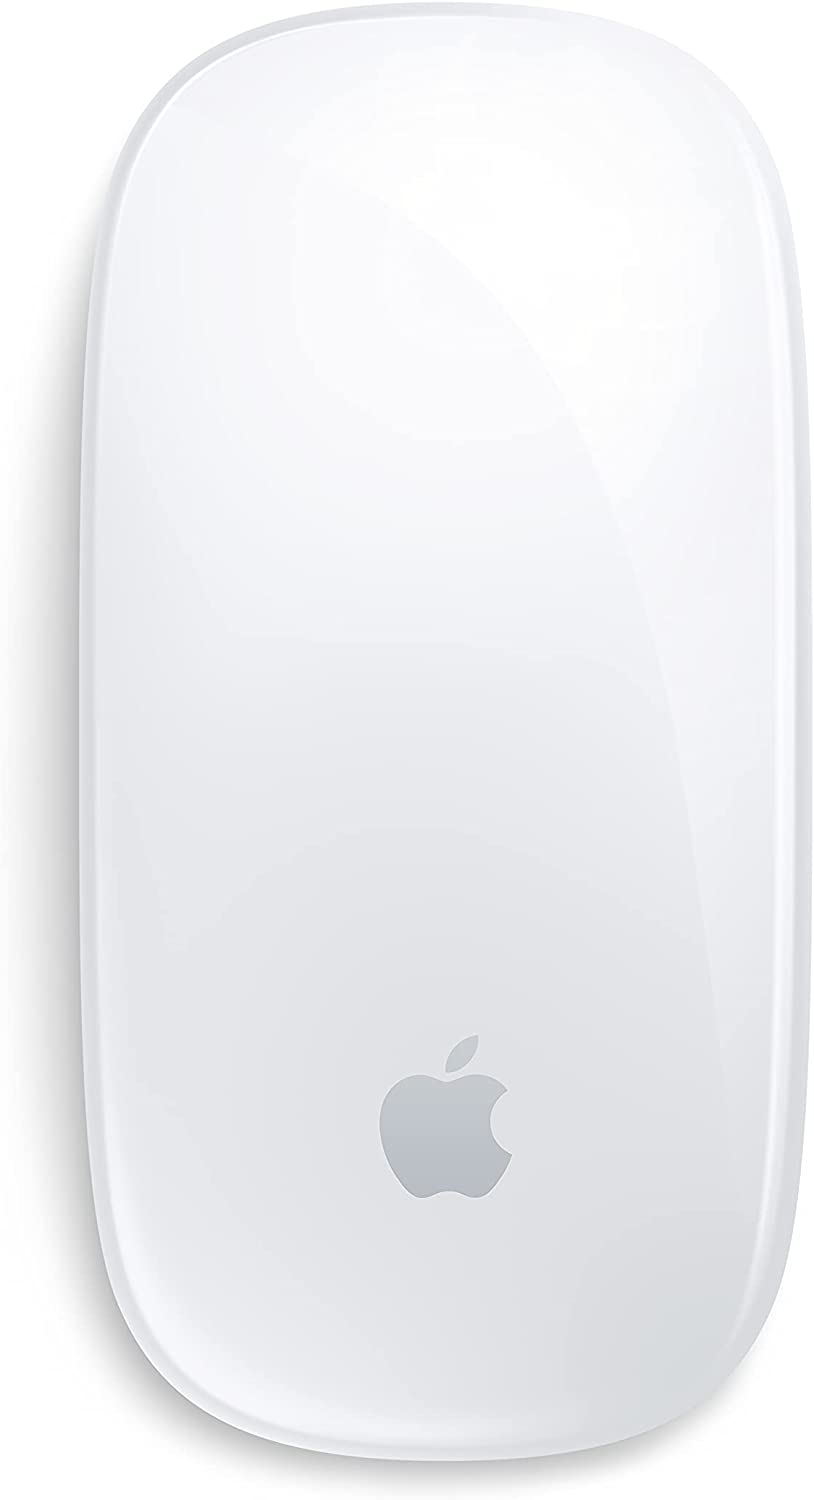 Magic Mouse 2 White Silver New - Sealed